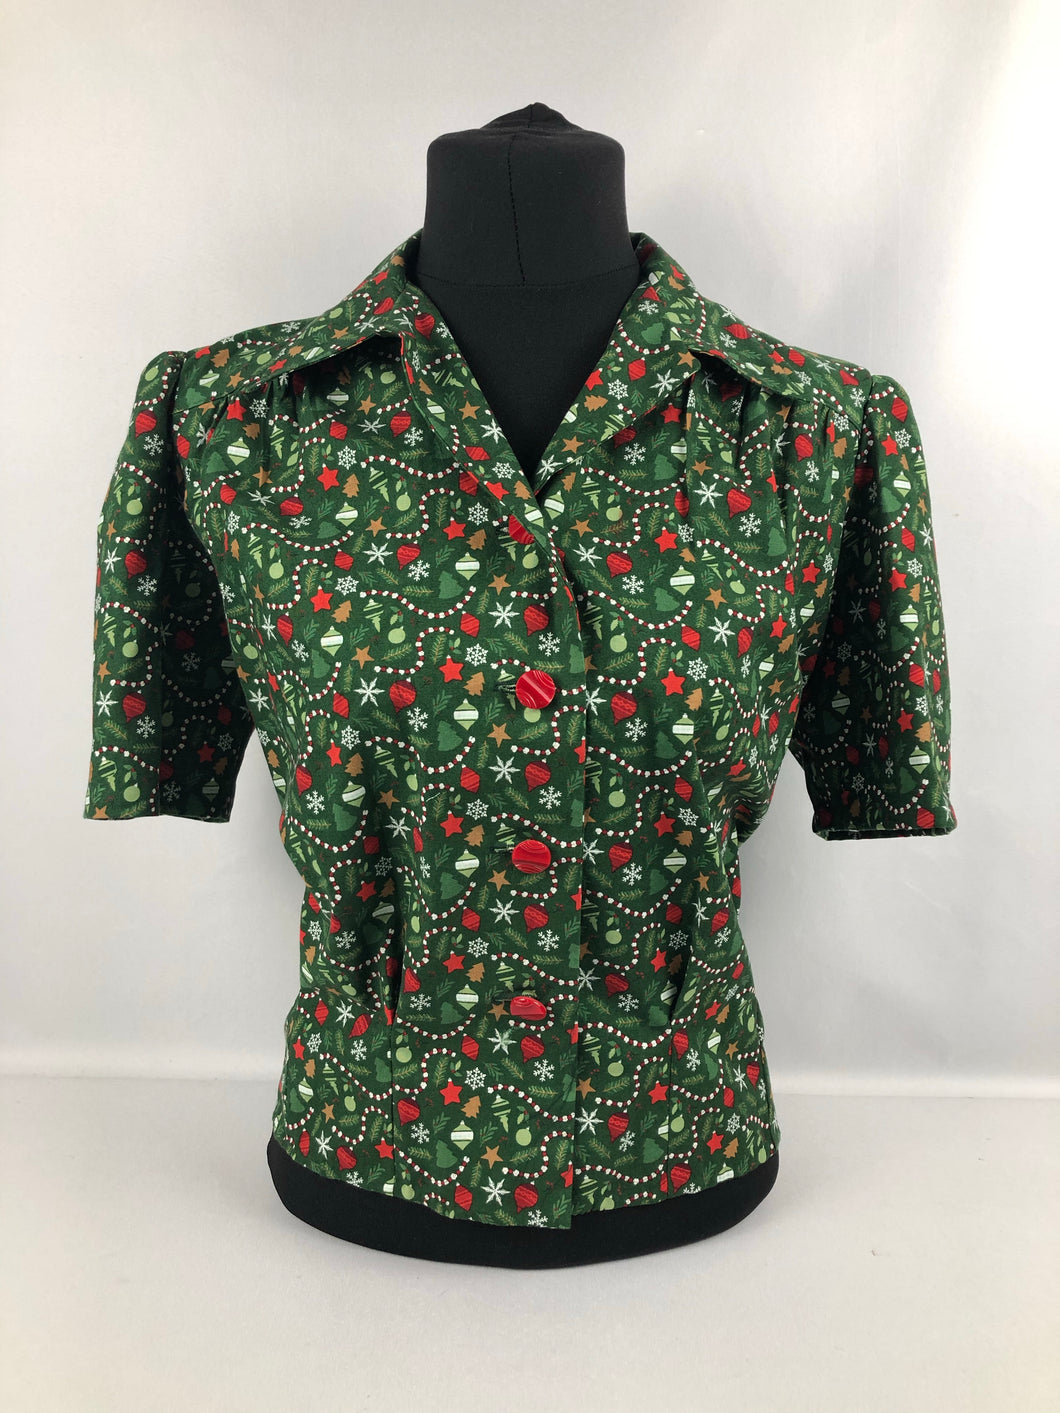 1940s Reproduction Christmas Blouse in Riley Blake Cotton - Bust 38